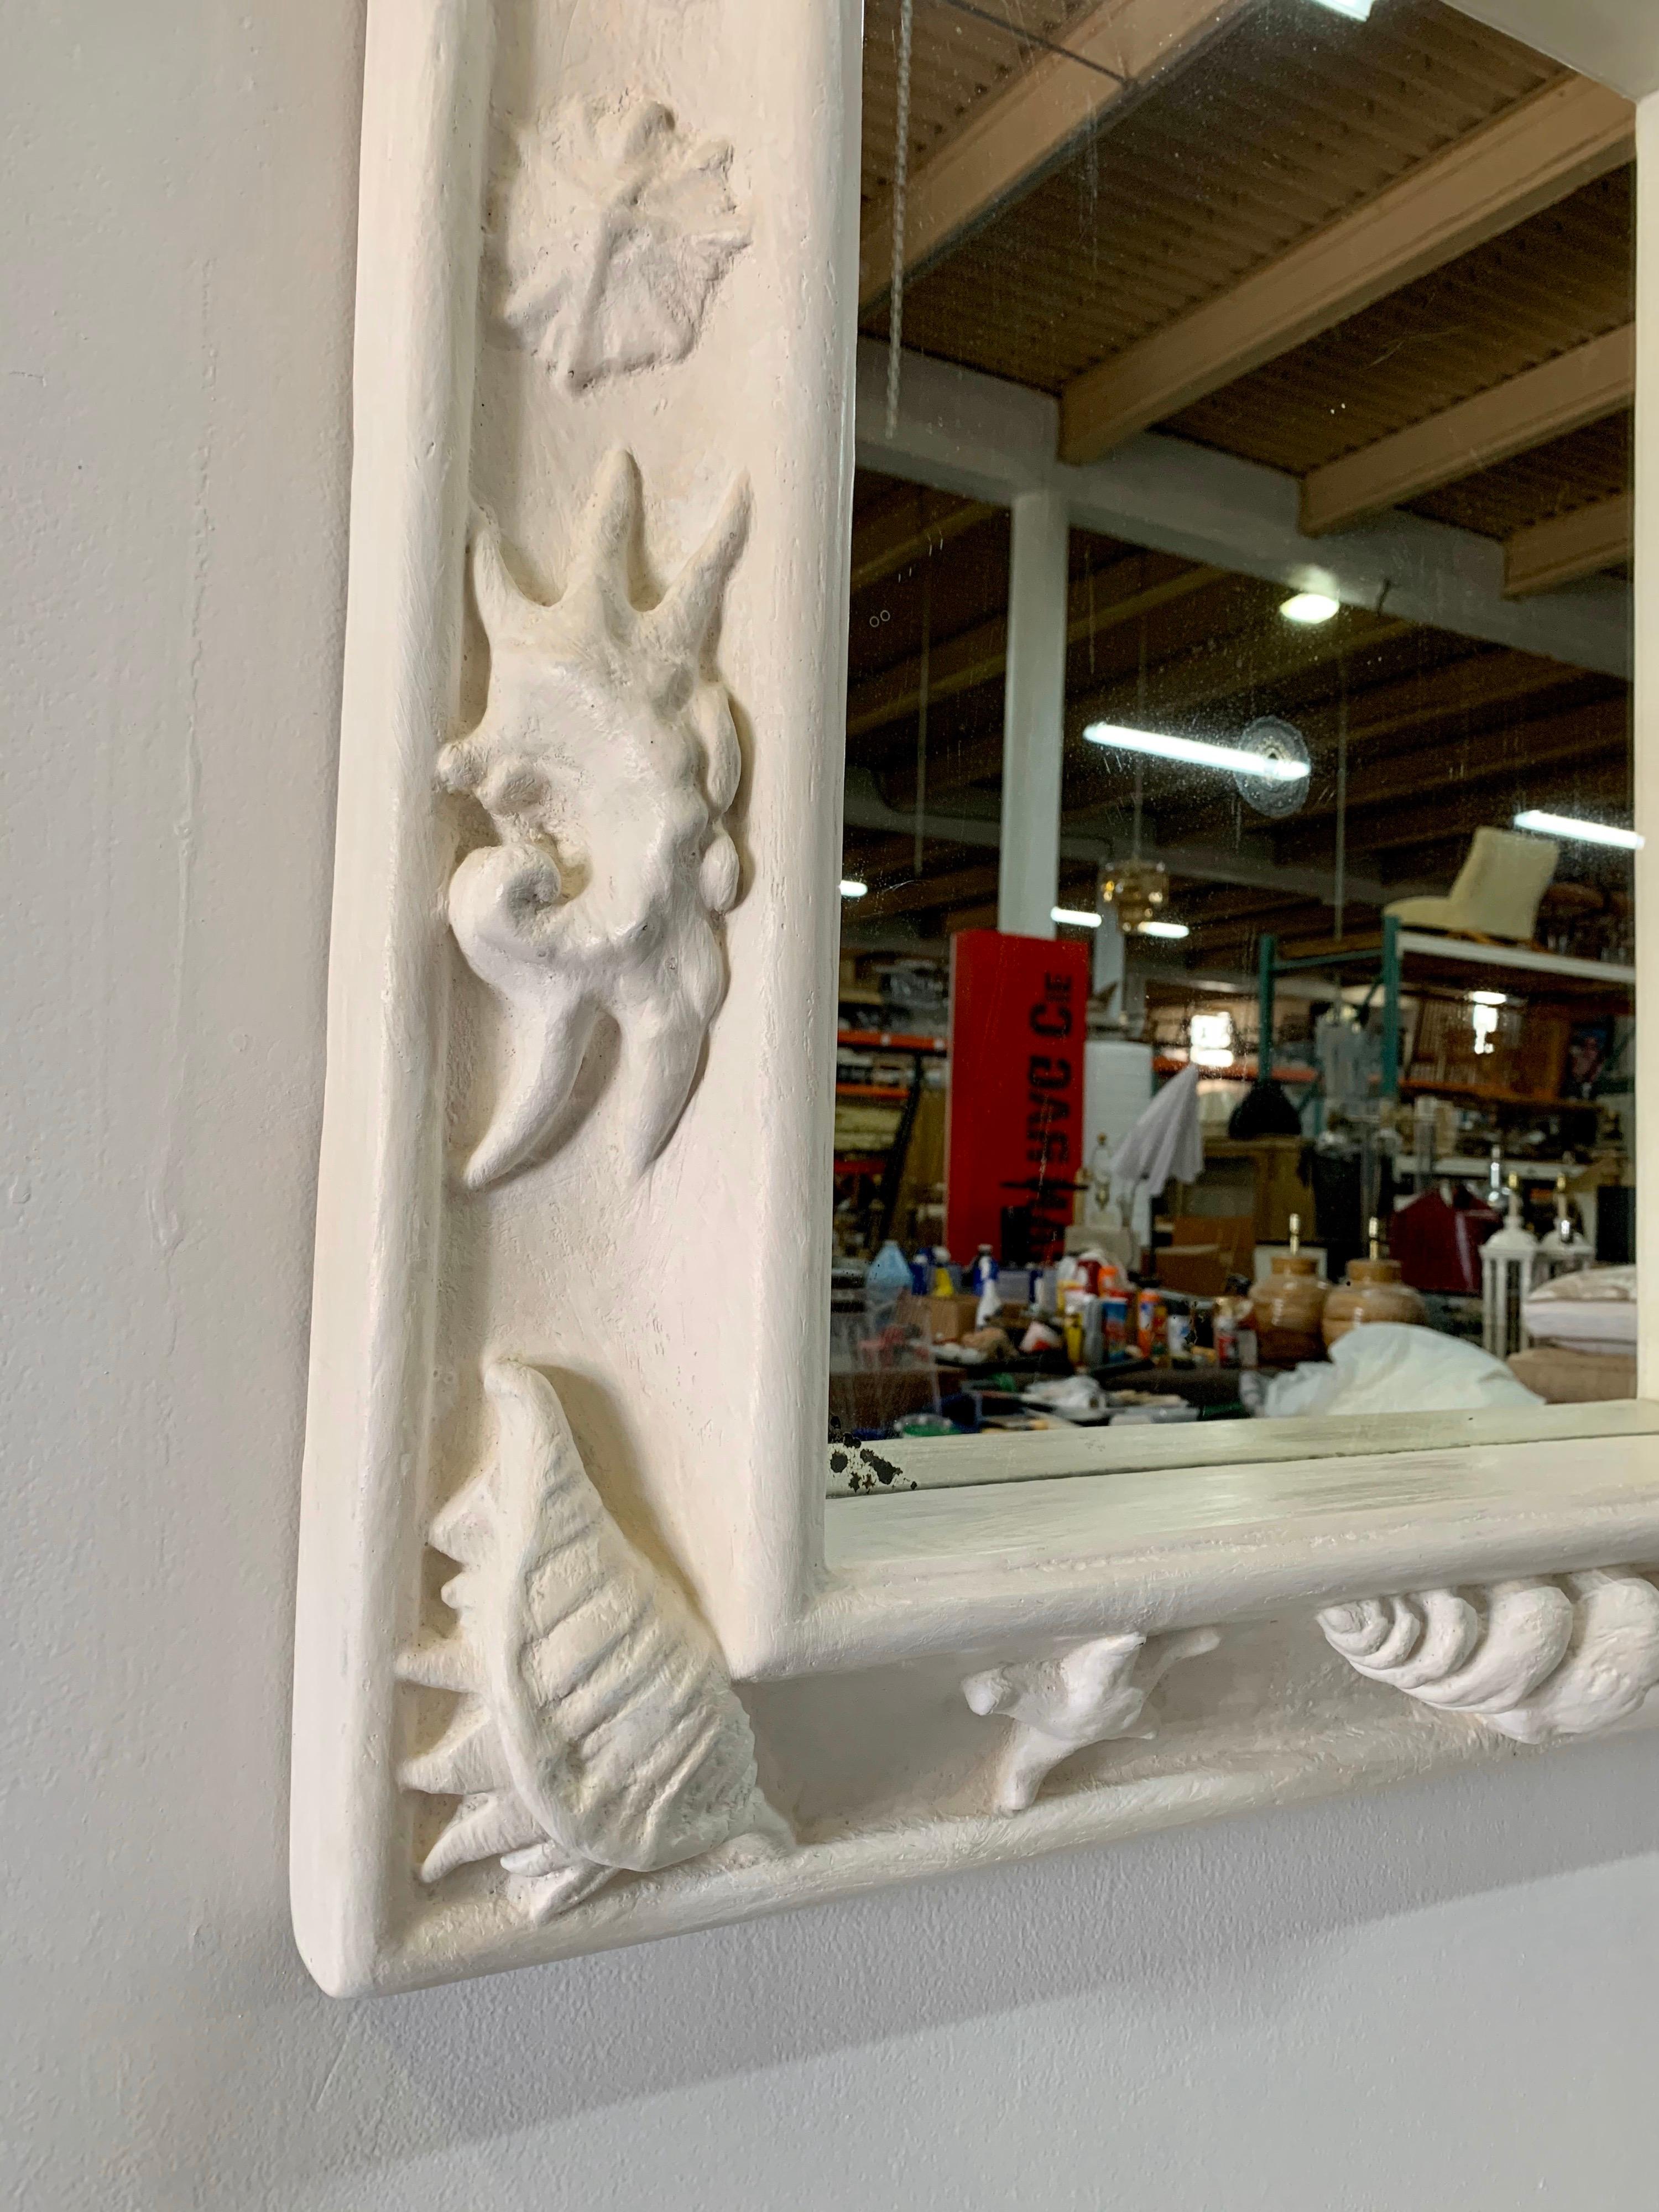 Acquired from the Estate of the late Marques De Sosa in Bal Harbour/Miami, a prominent Swiss-Argentinean collector with galleries in Miami and Monte Carlo. The plaster frame is covered in different shells throughout. Original antique mirror shows